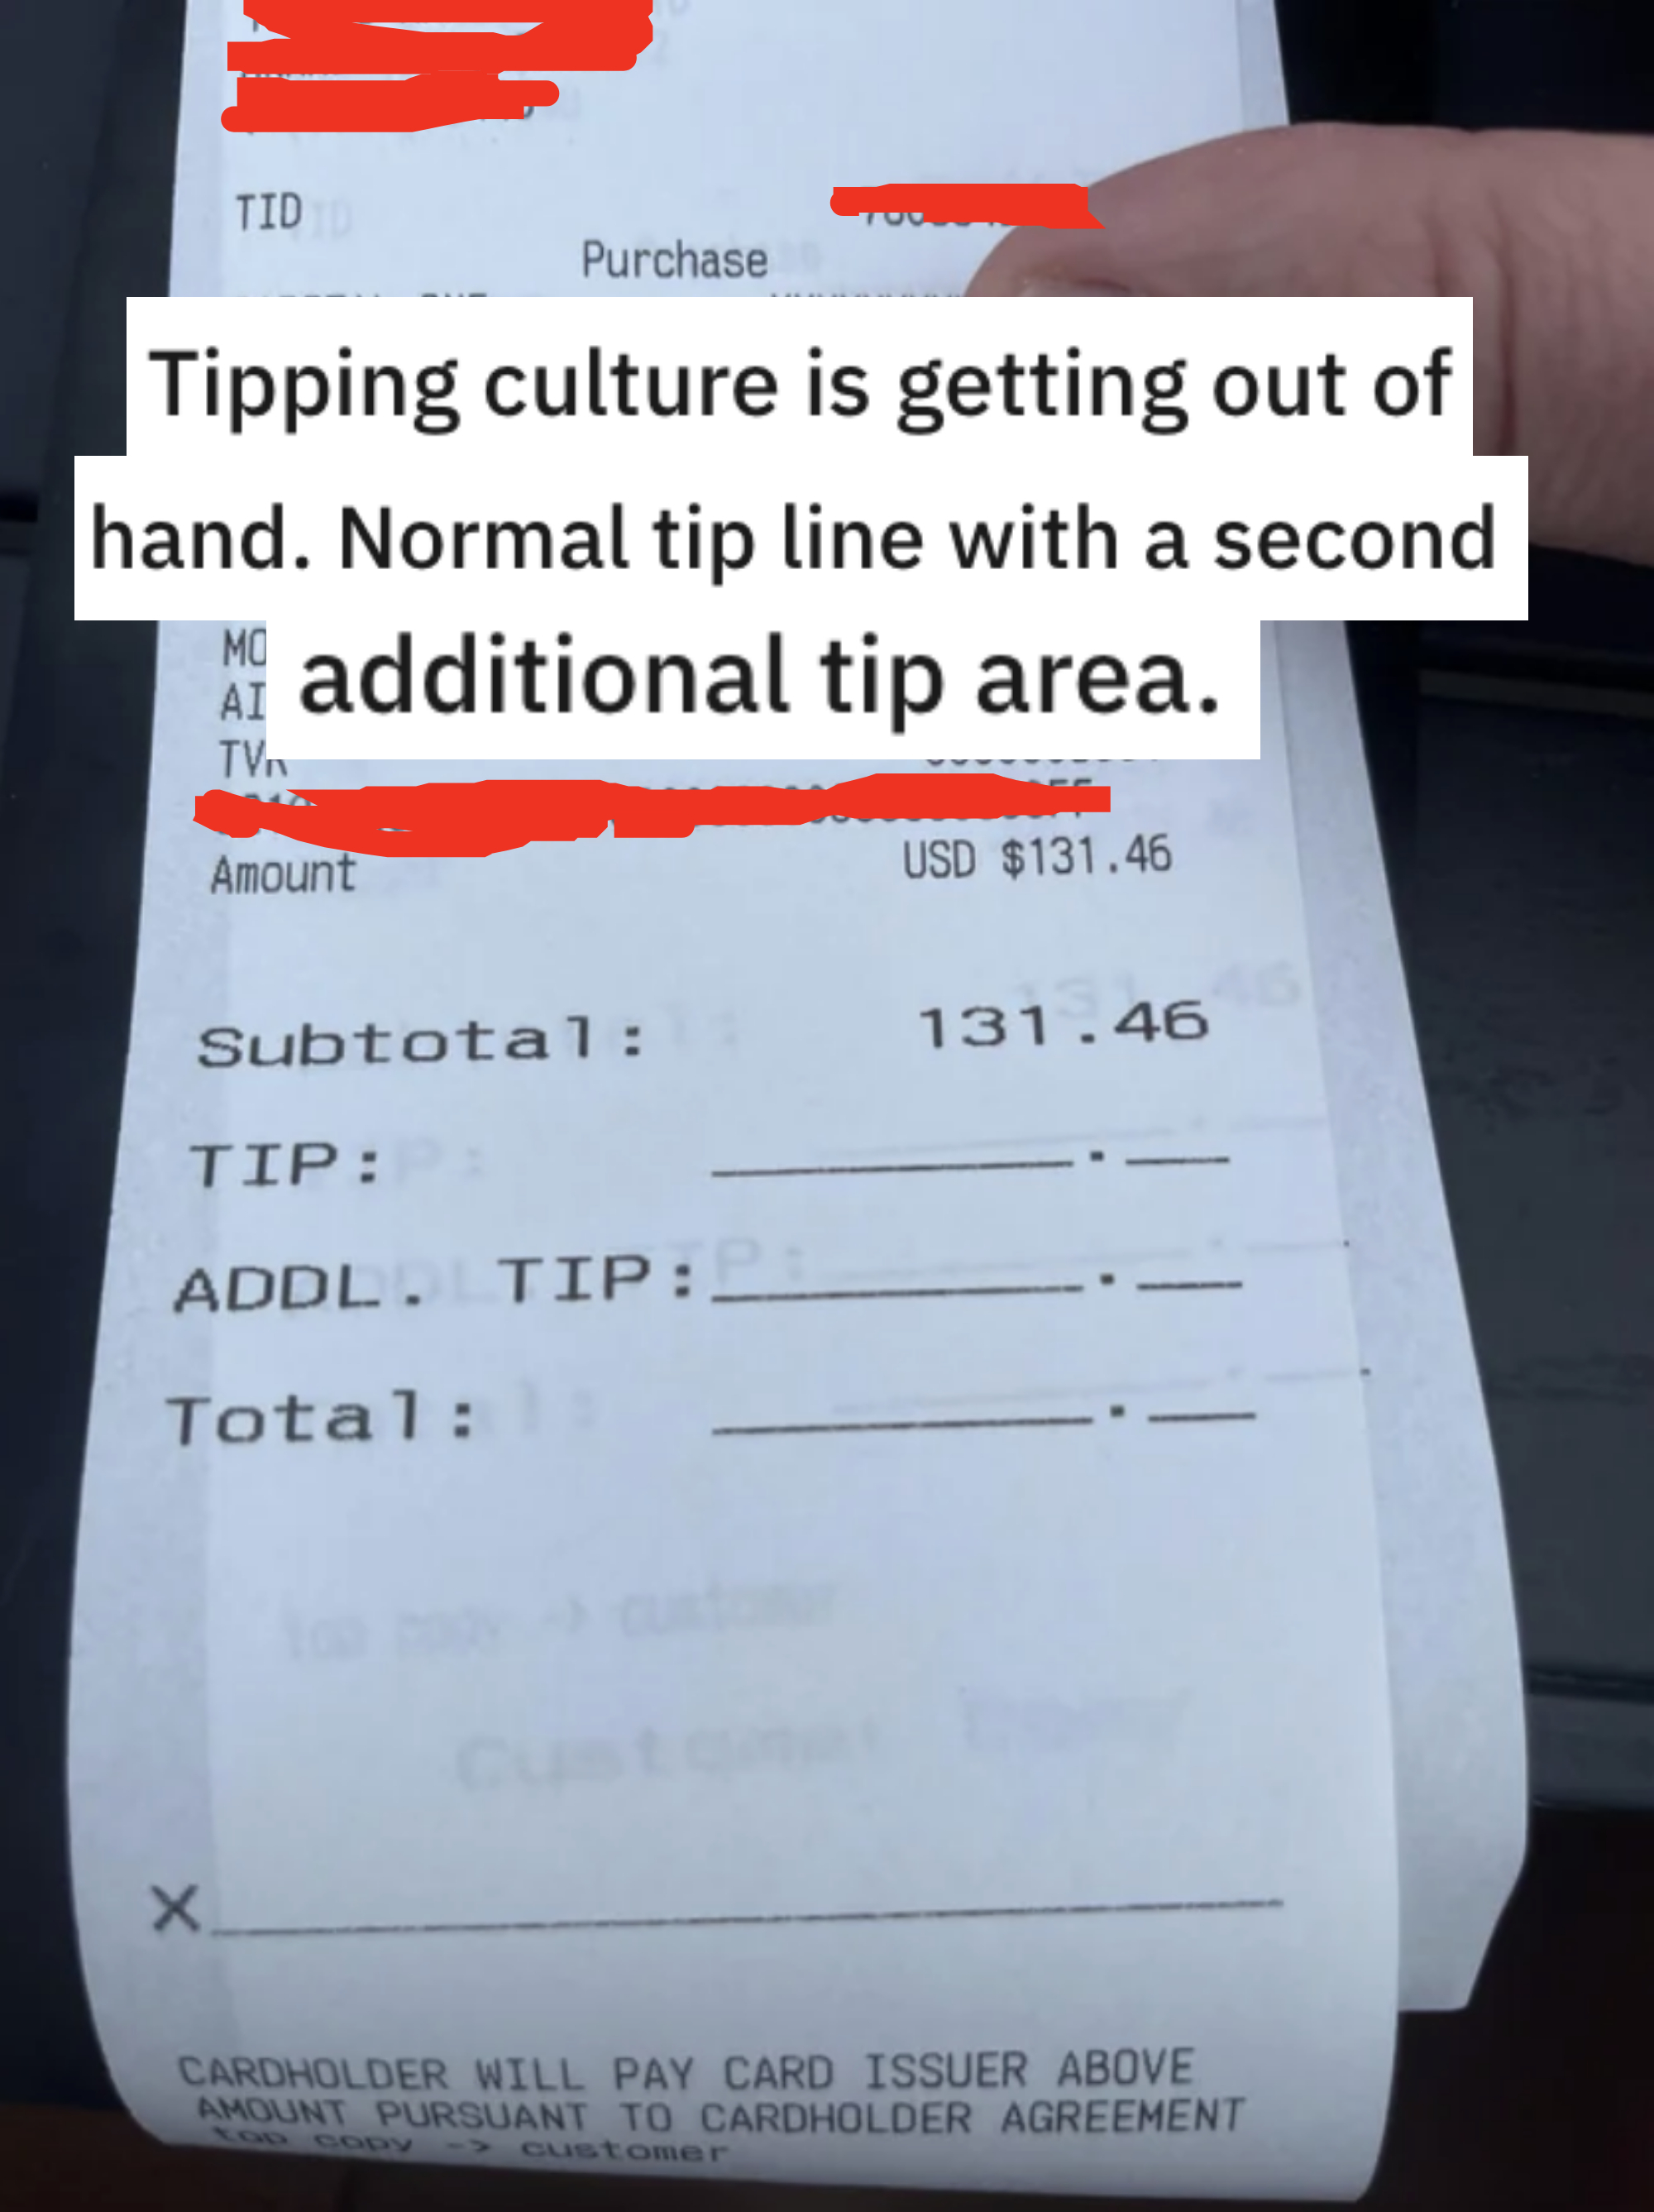 receipt has space for a tip and then additional tip